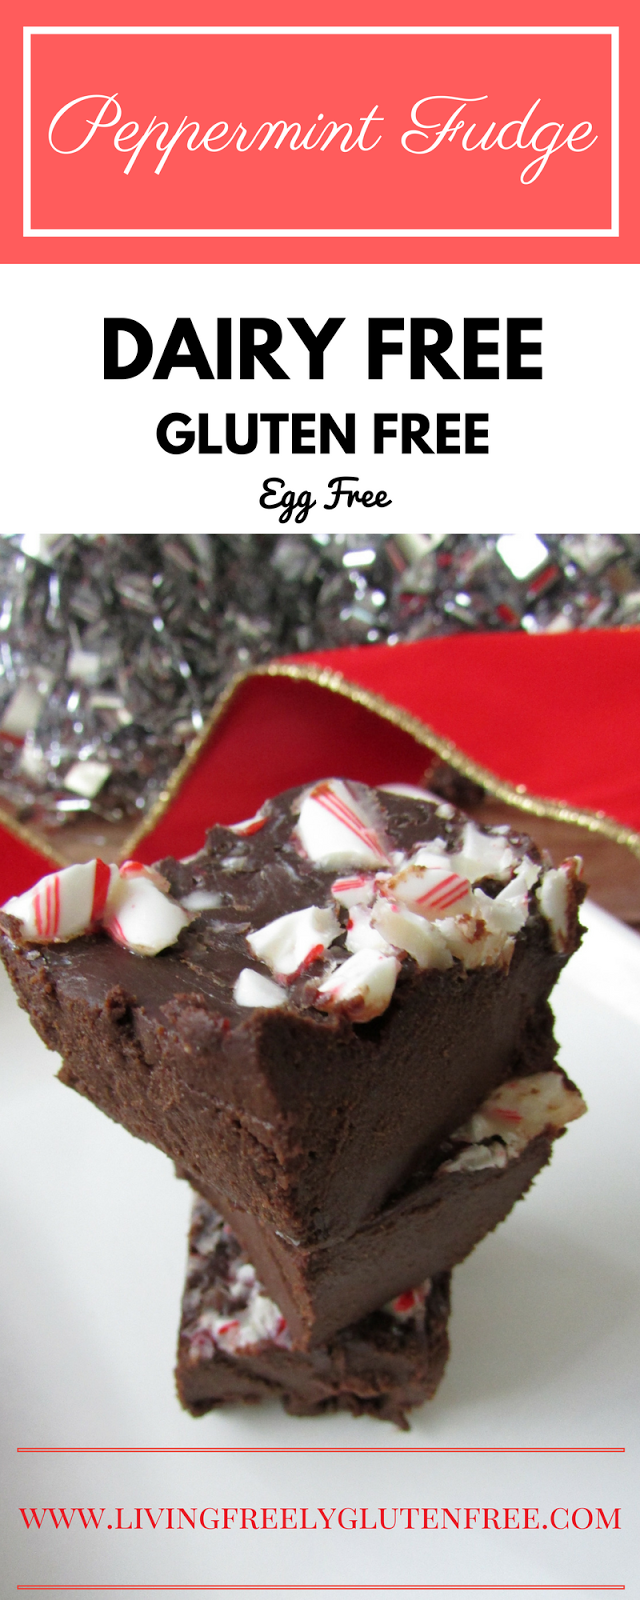 7 of the Best Gluten and Dairy Free Holiday Treats that are Easy to Make. Visit shortsweetmom.com to see this roundup of delicious recipes from some of my favorite mom bloggers. 